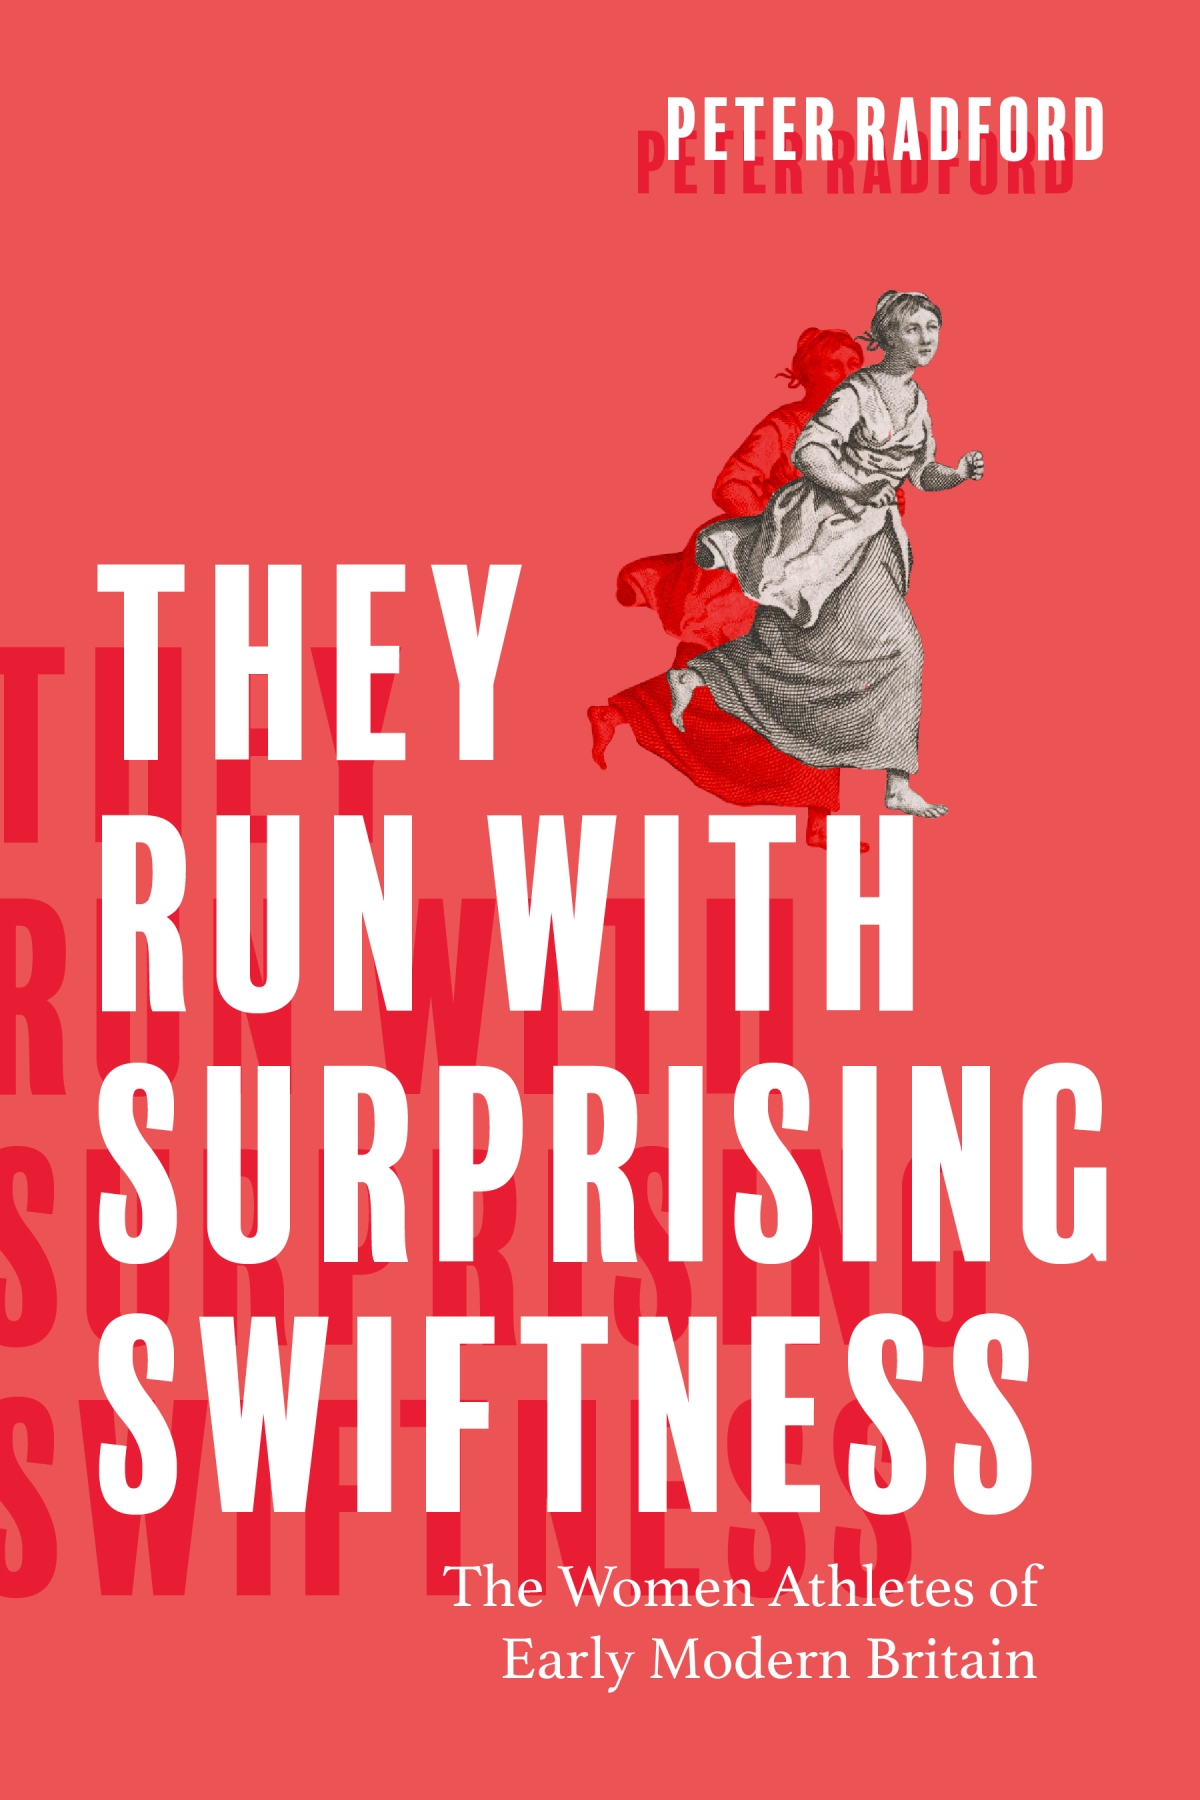 They Run with Surprising Swiftness: The Women Athletes of Early Modern Britain. By Peter Radford. Review by Carolyn D. Williams